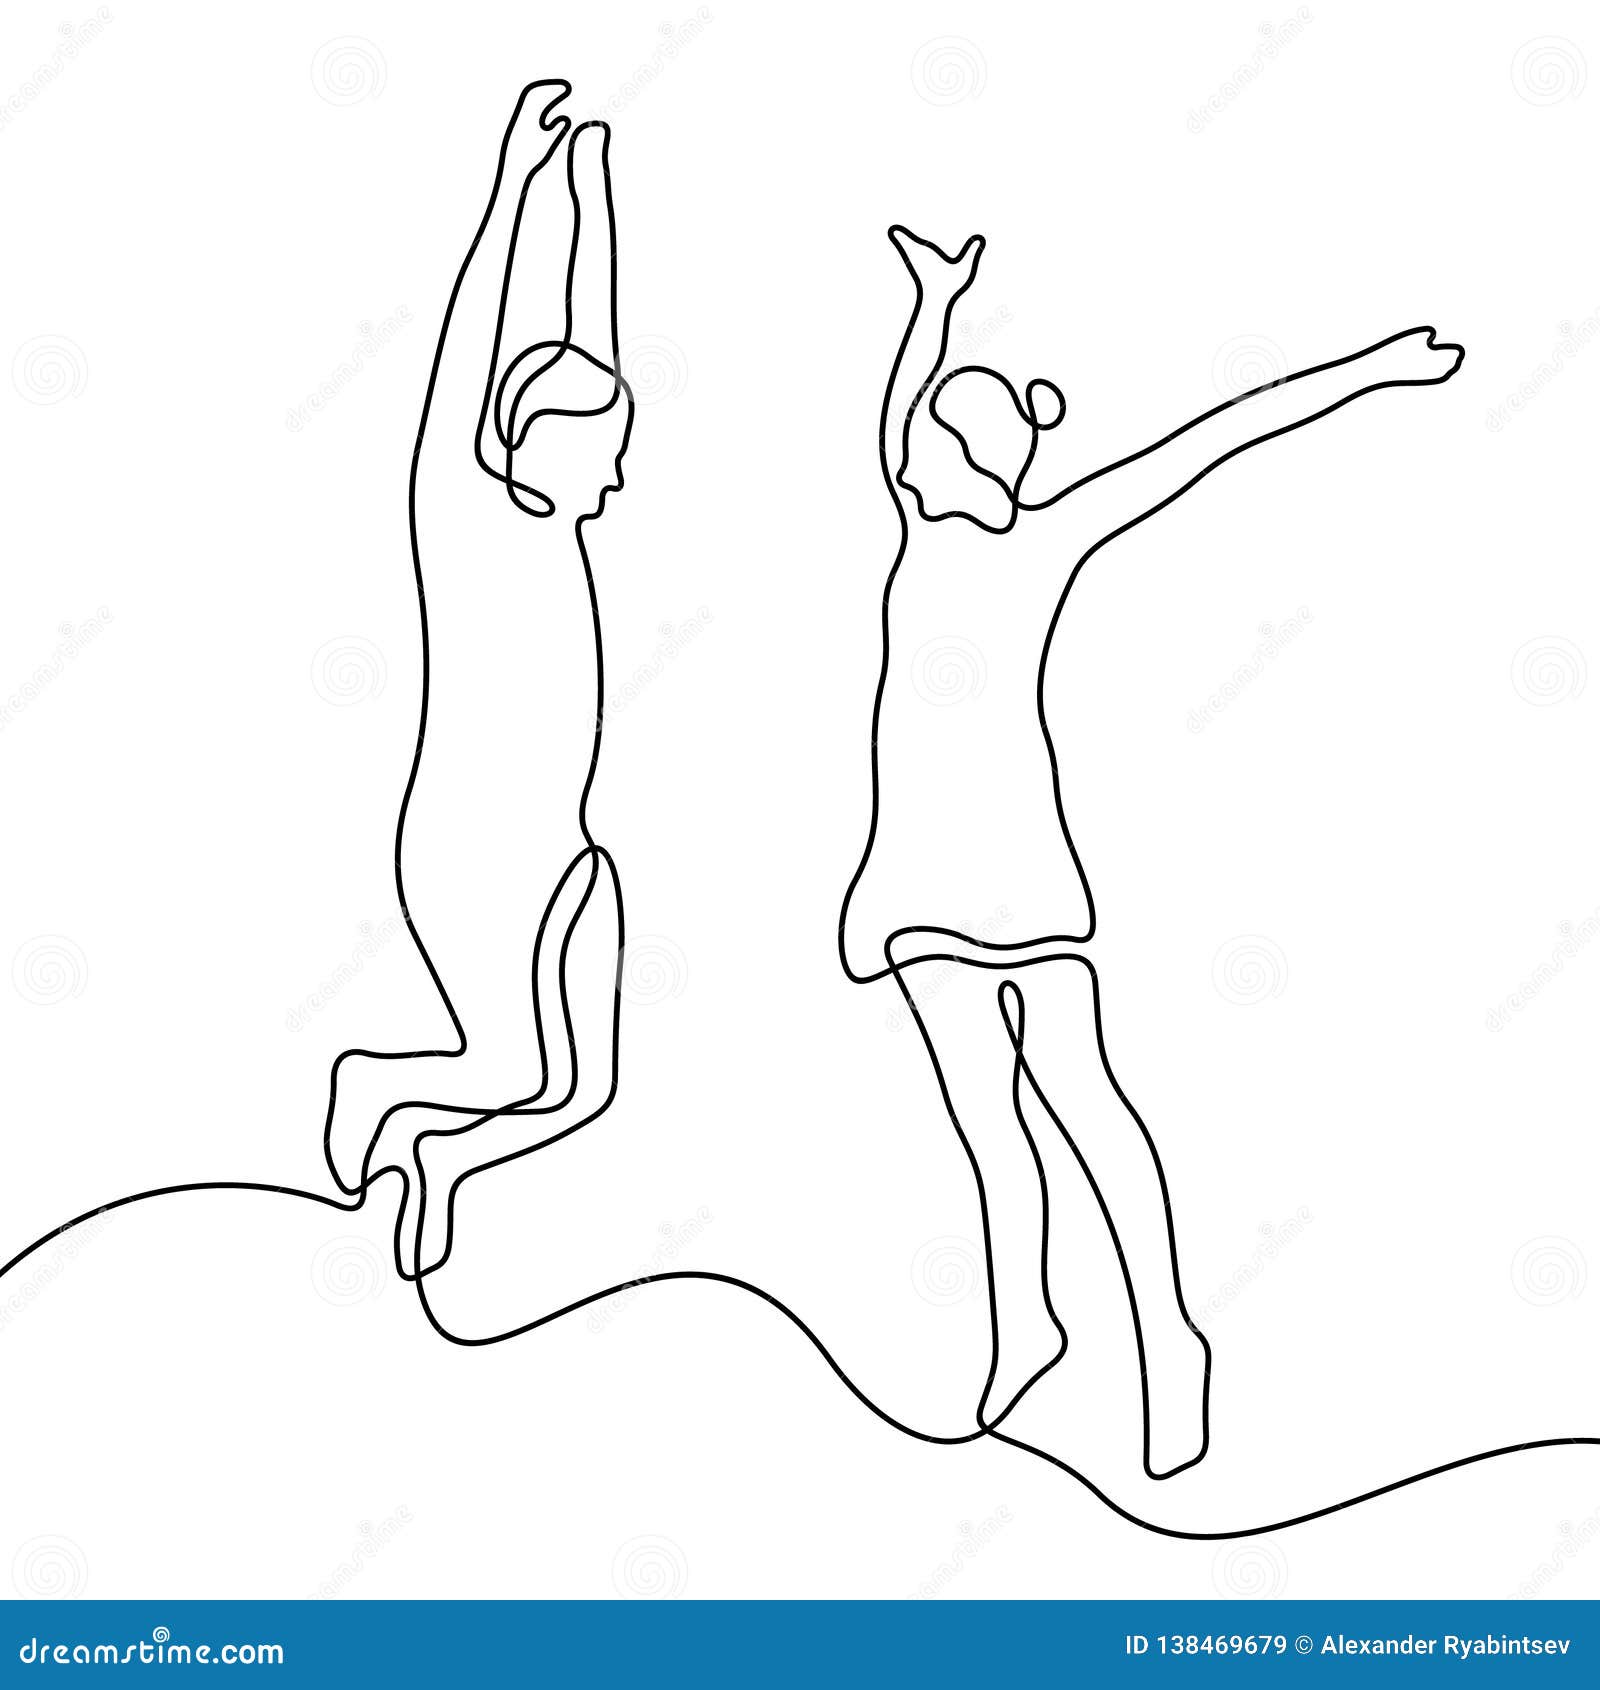 person jumping line drawing